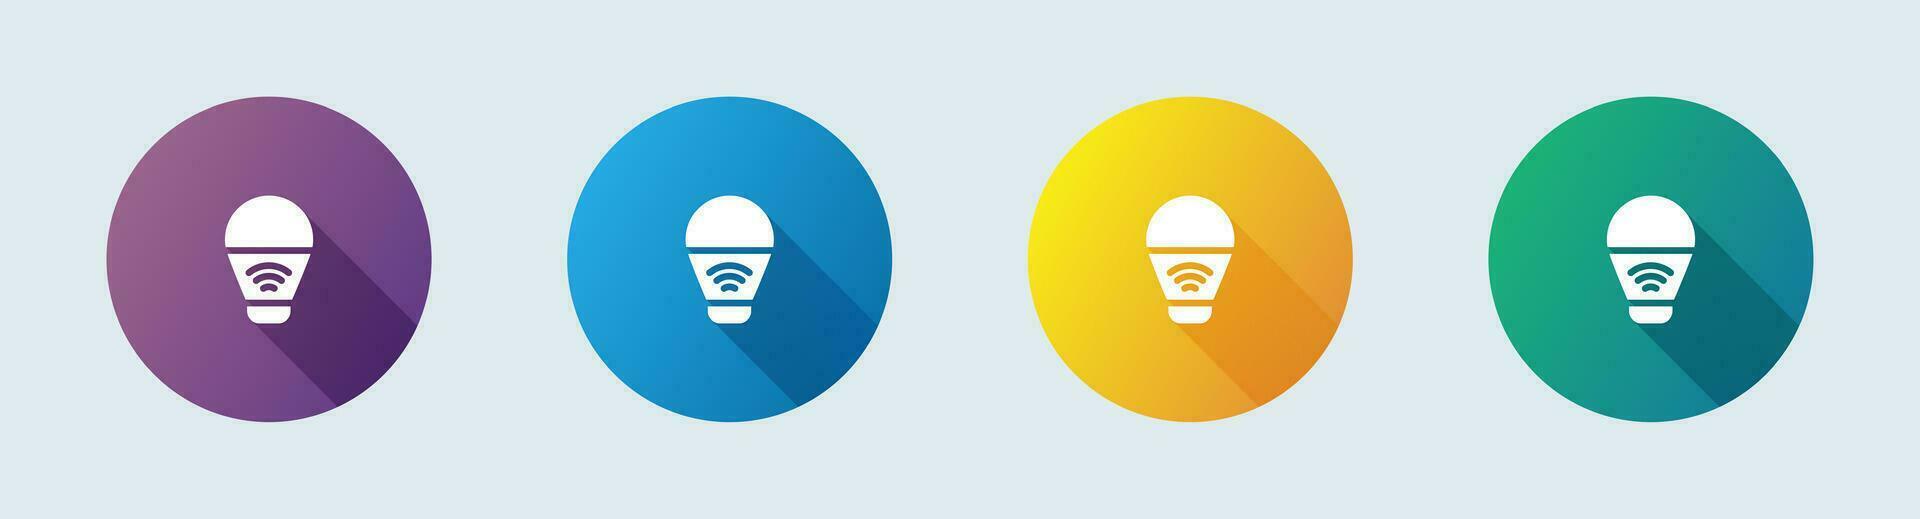 Smart bulb solid icon in flat design style.  Innovation signs vector illustration.